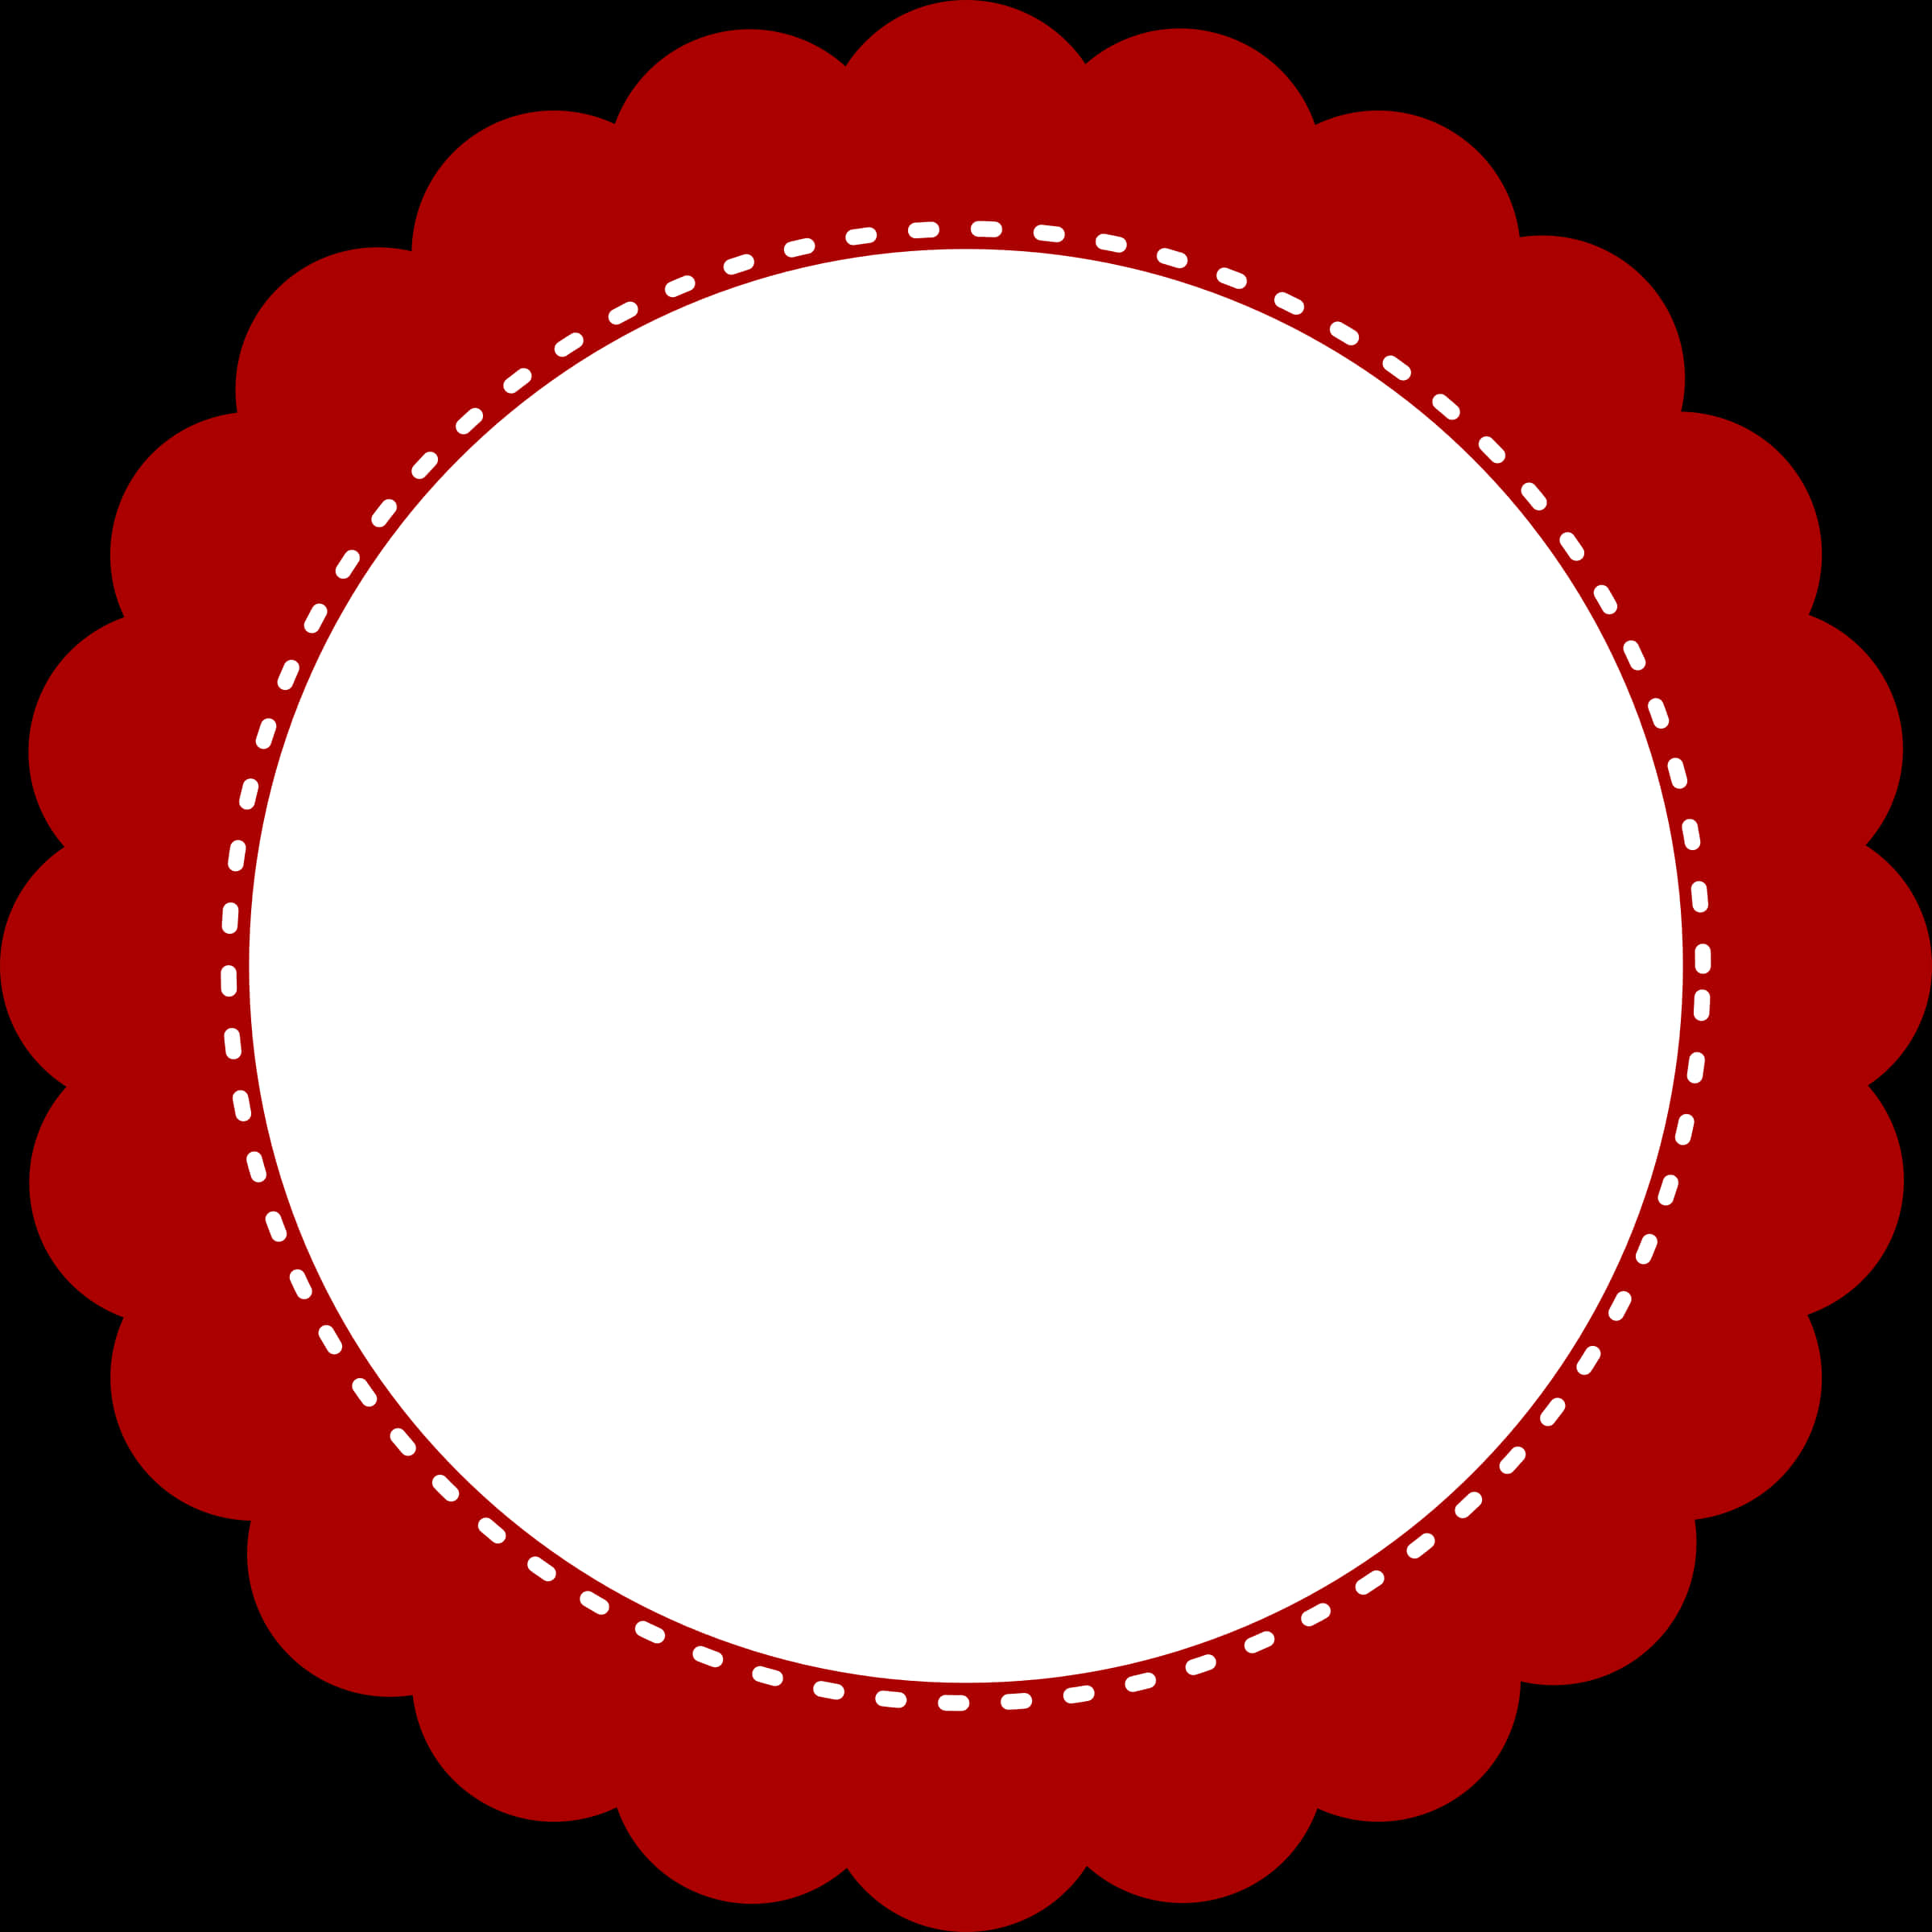 A Red And White Circle With White Stitching